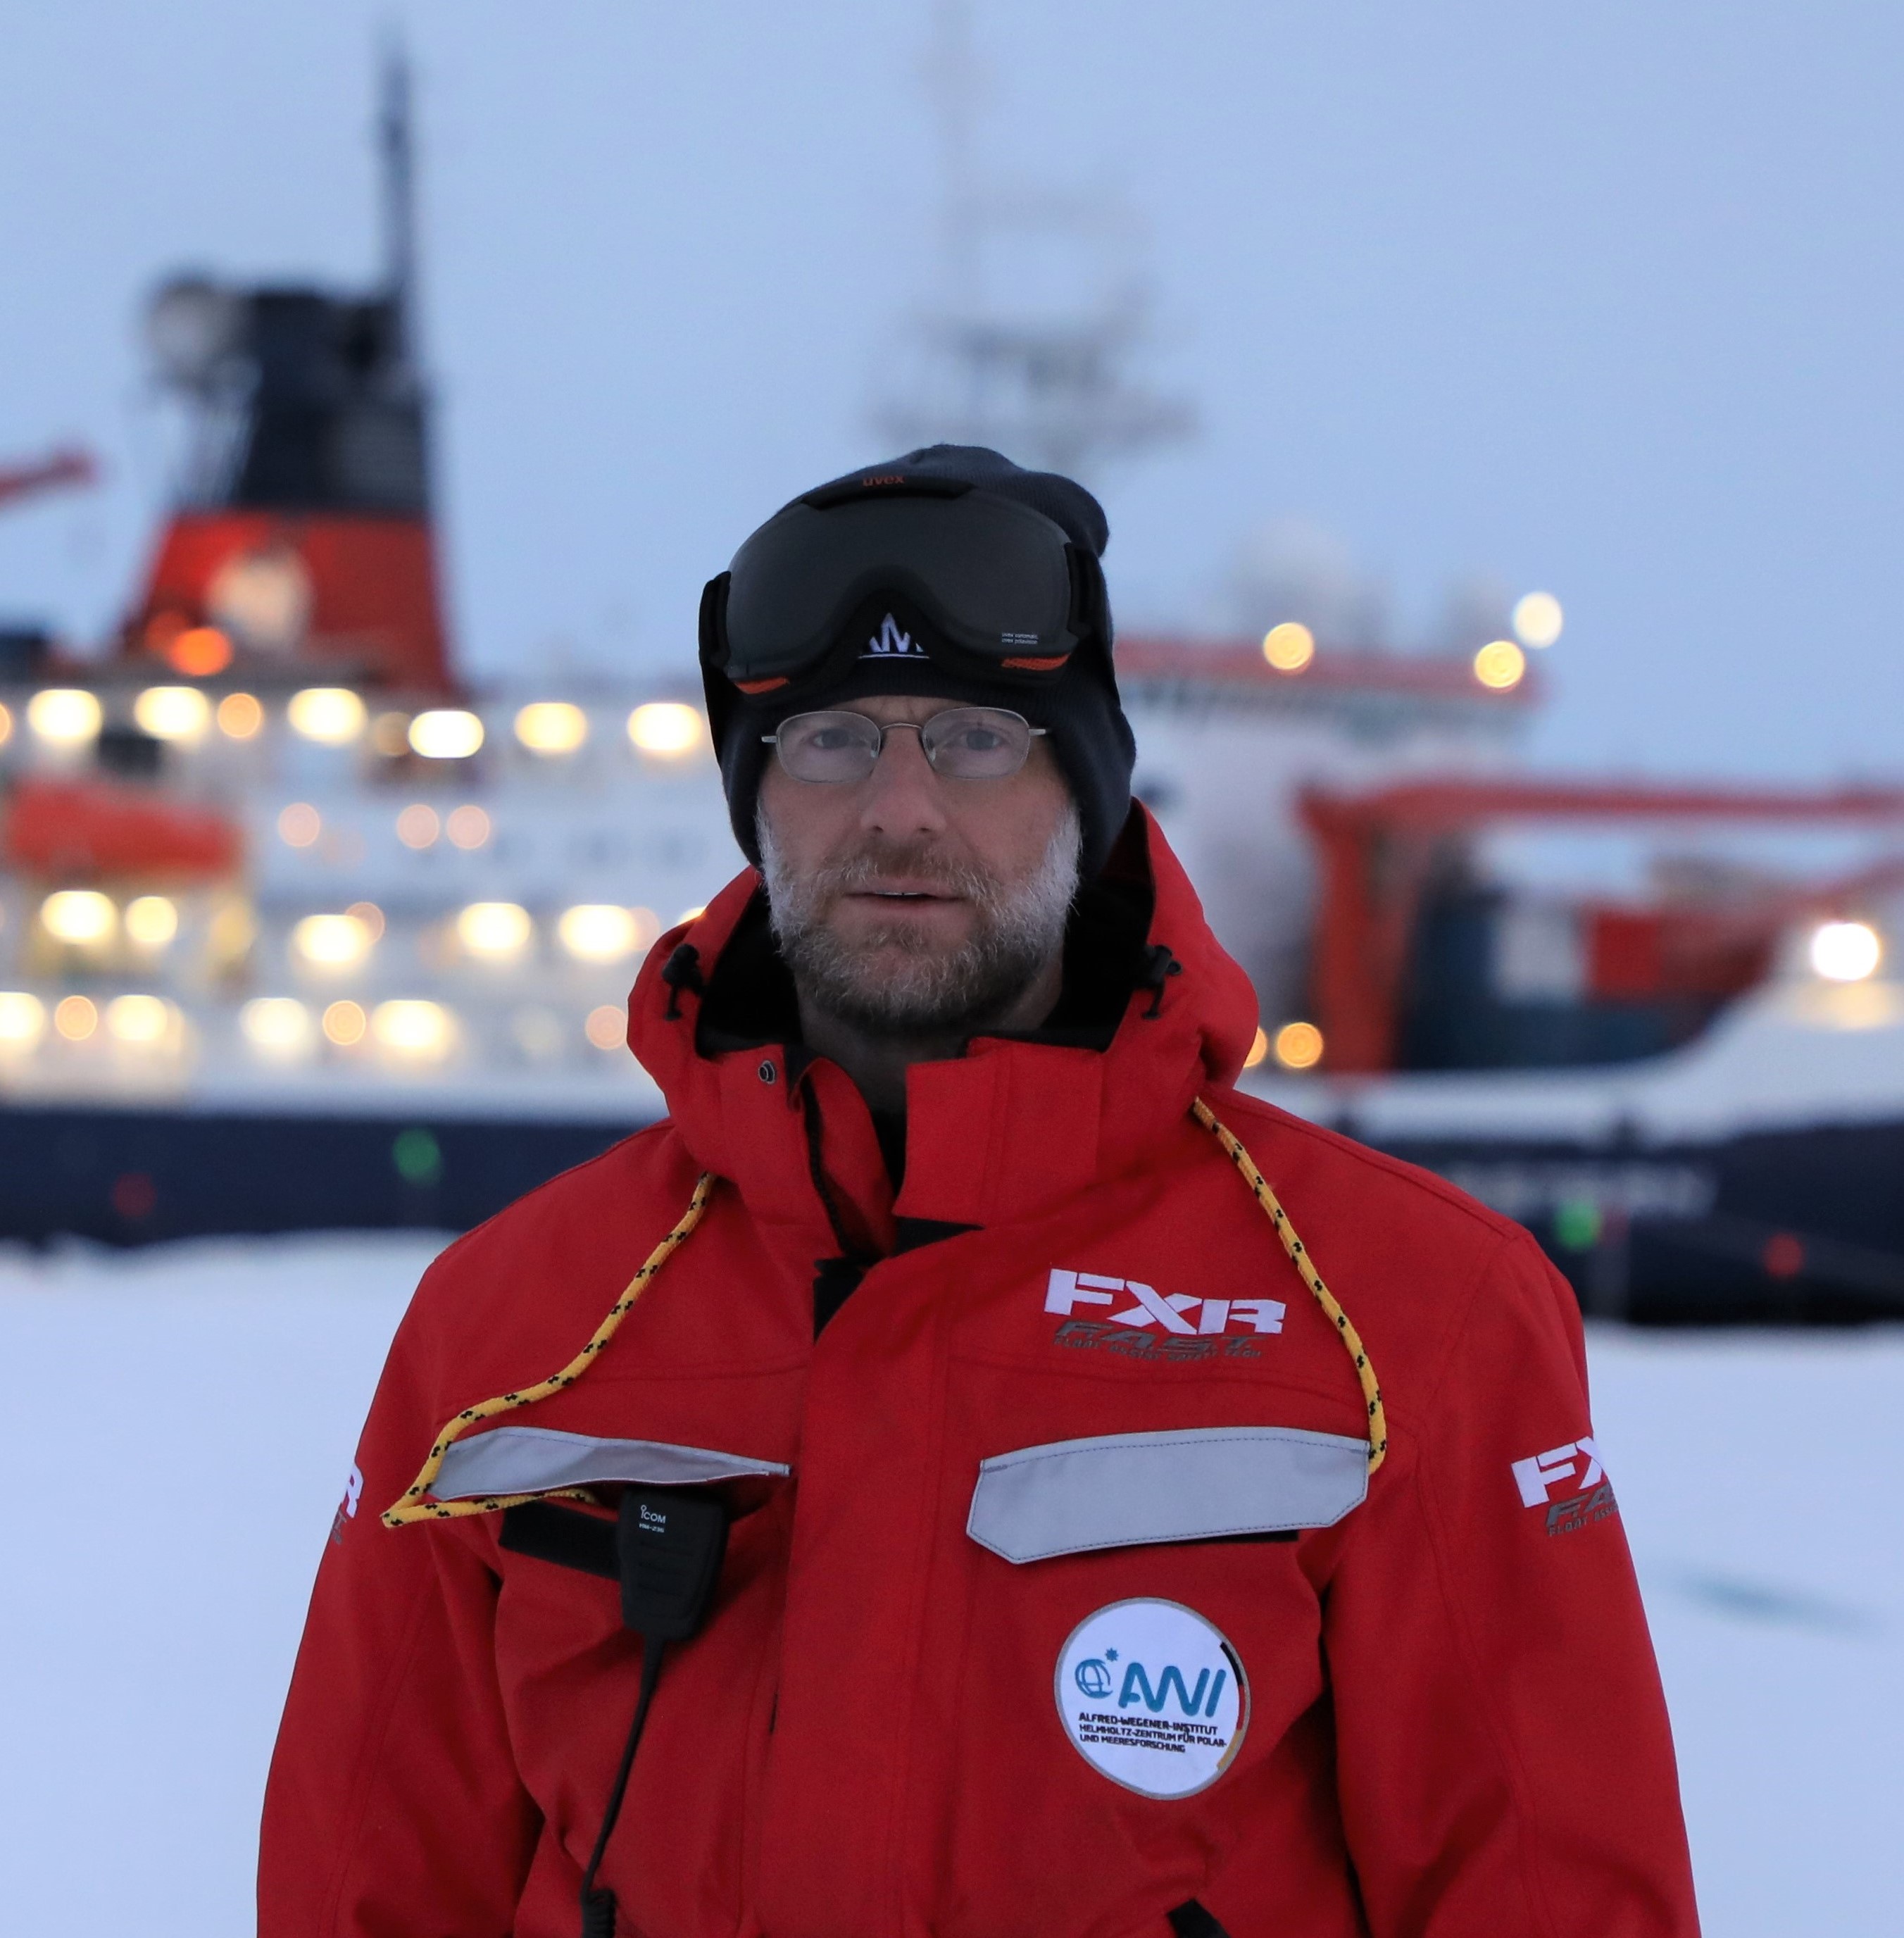 Matthew Shupe is all bundled up in winter weather gear and gazes at the camera on sea ice in front of an icebreaker ship in the Arctic